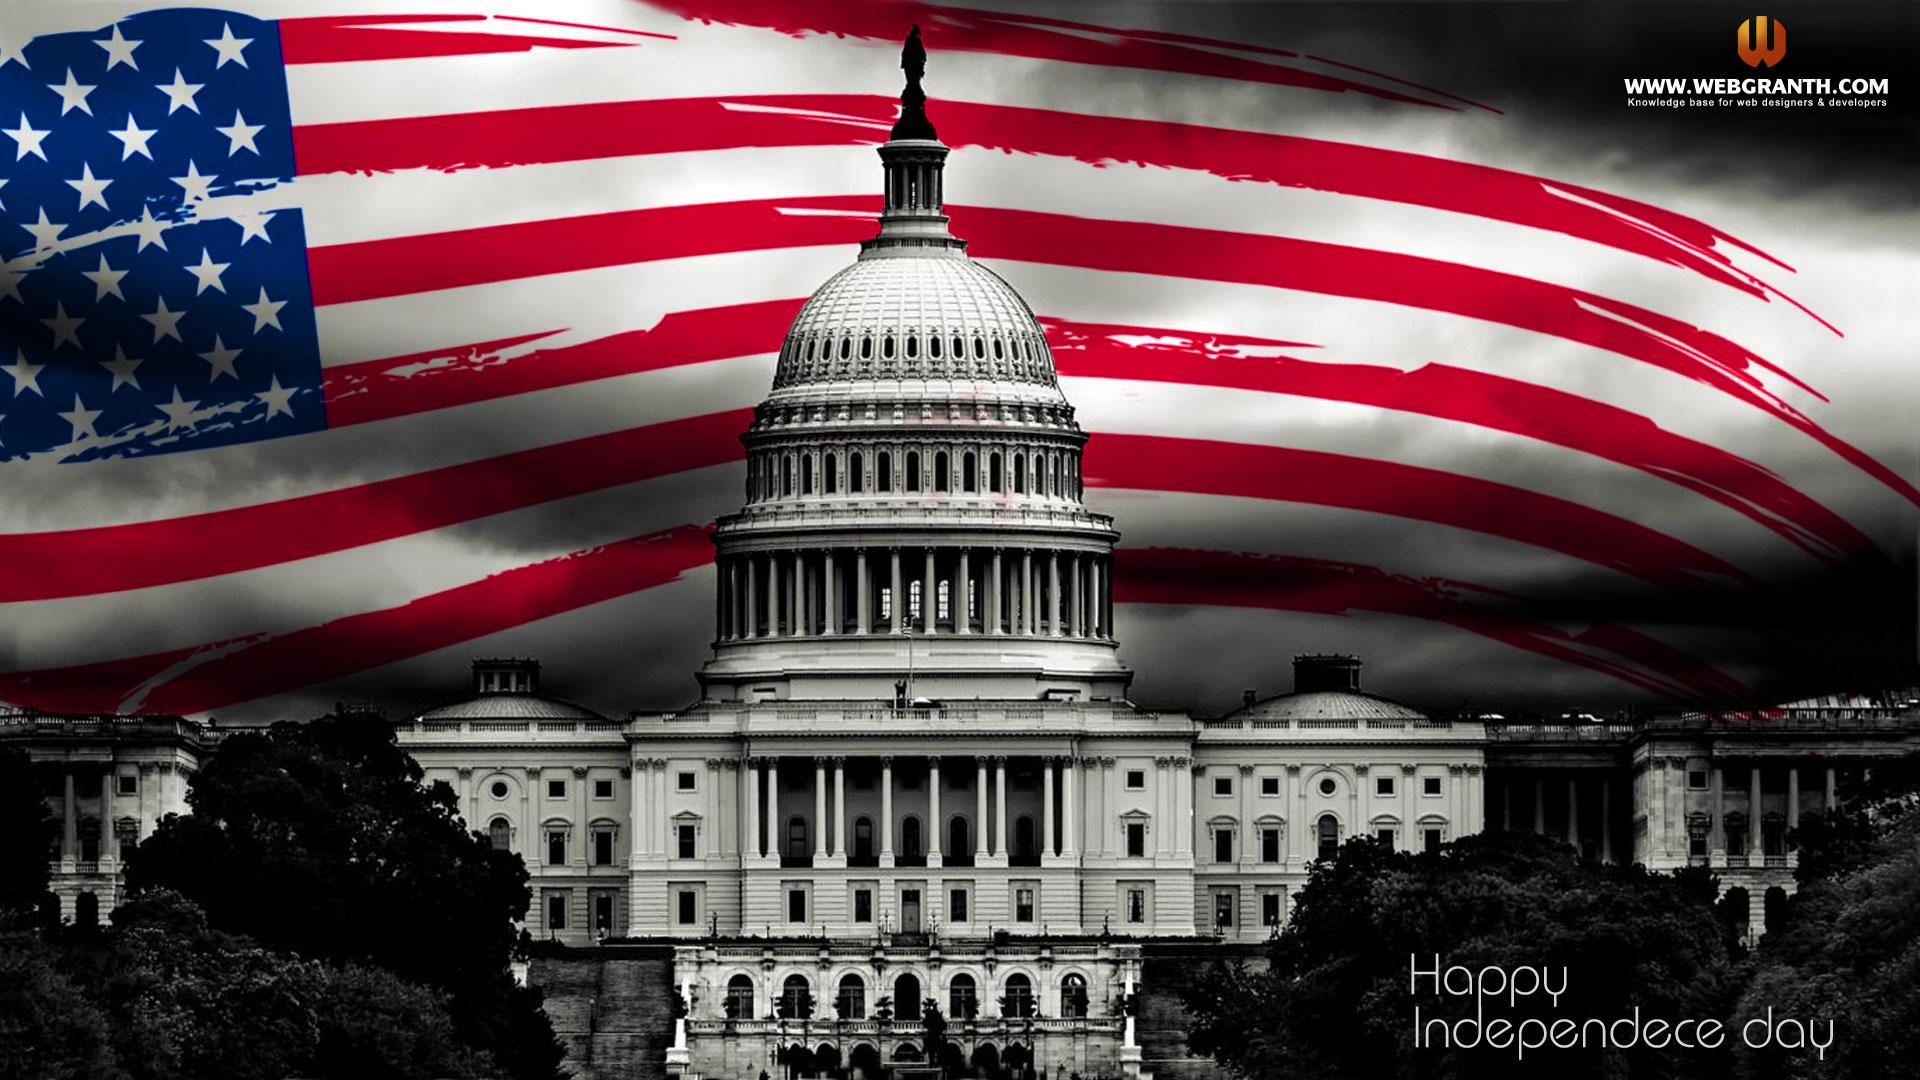 Best 40+ United States Congress Wallpapers on HipWallpapers